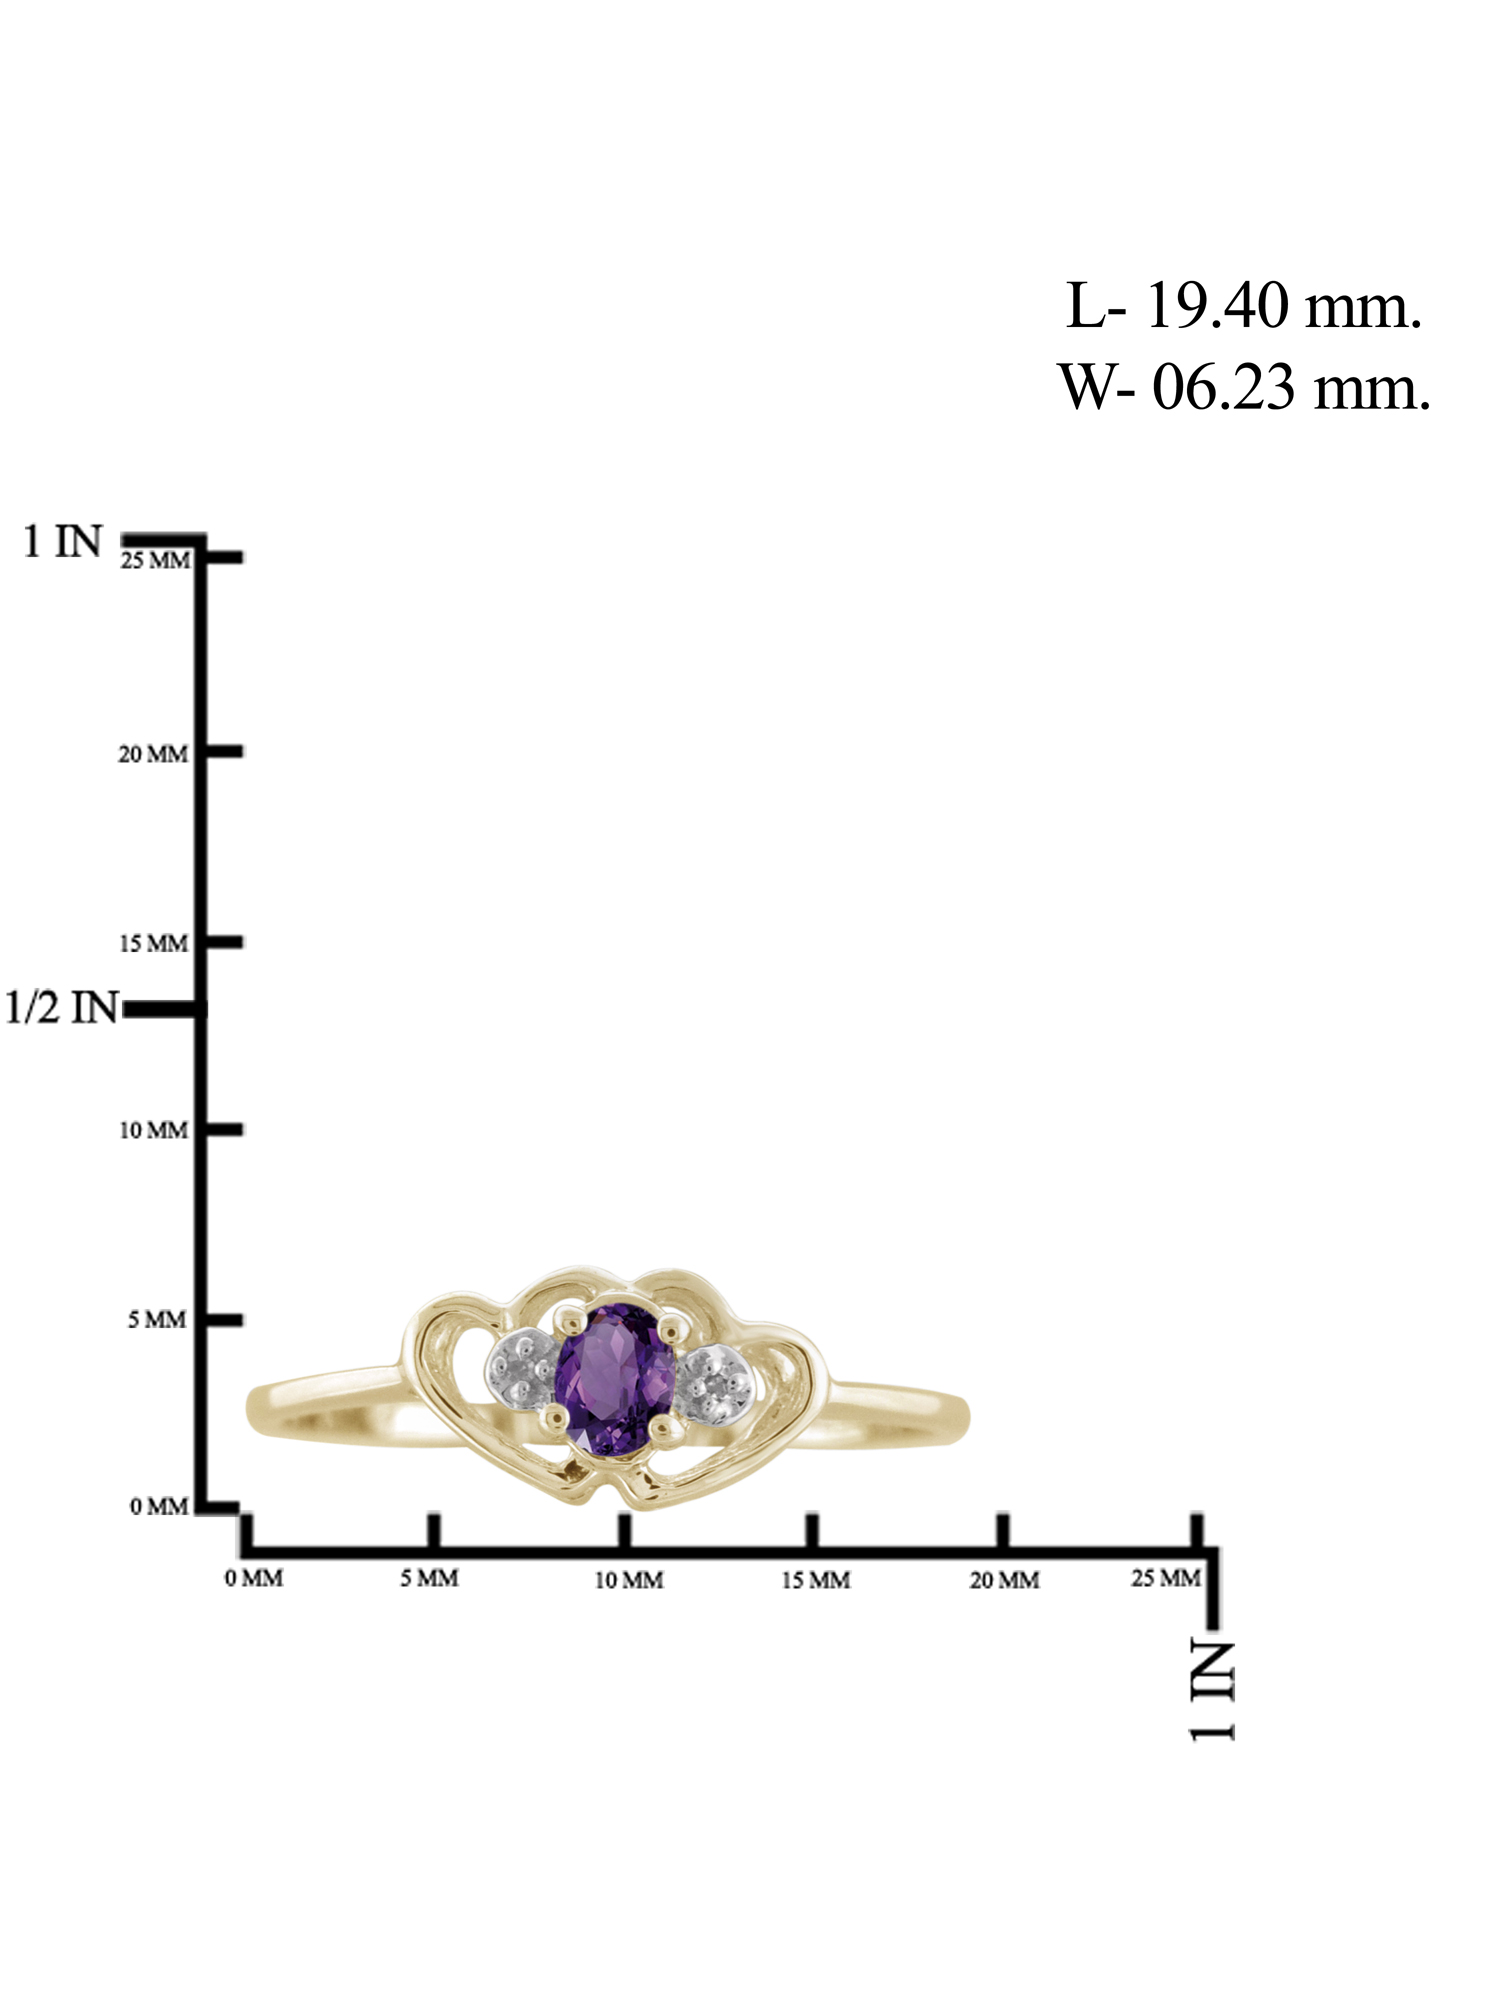 JewelersClub Amethyst Ring Birthstone Jewelry – 0.15 Carat Amethyst 14K Gold Plated Silver Ring Jewelry with White Diamond Accent – Gemstone Rings with Hypoallergenic 14K Gold Plated Silver Band - image 2 of 4